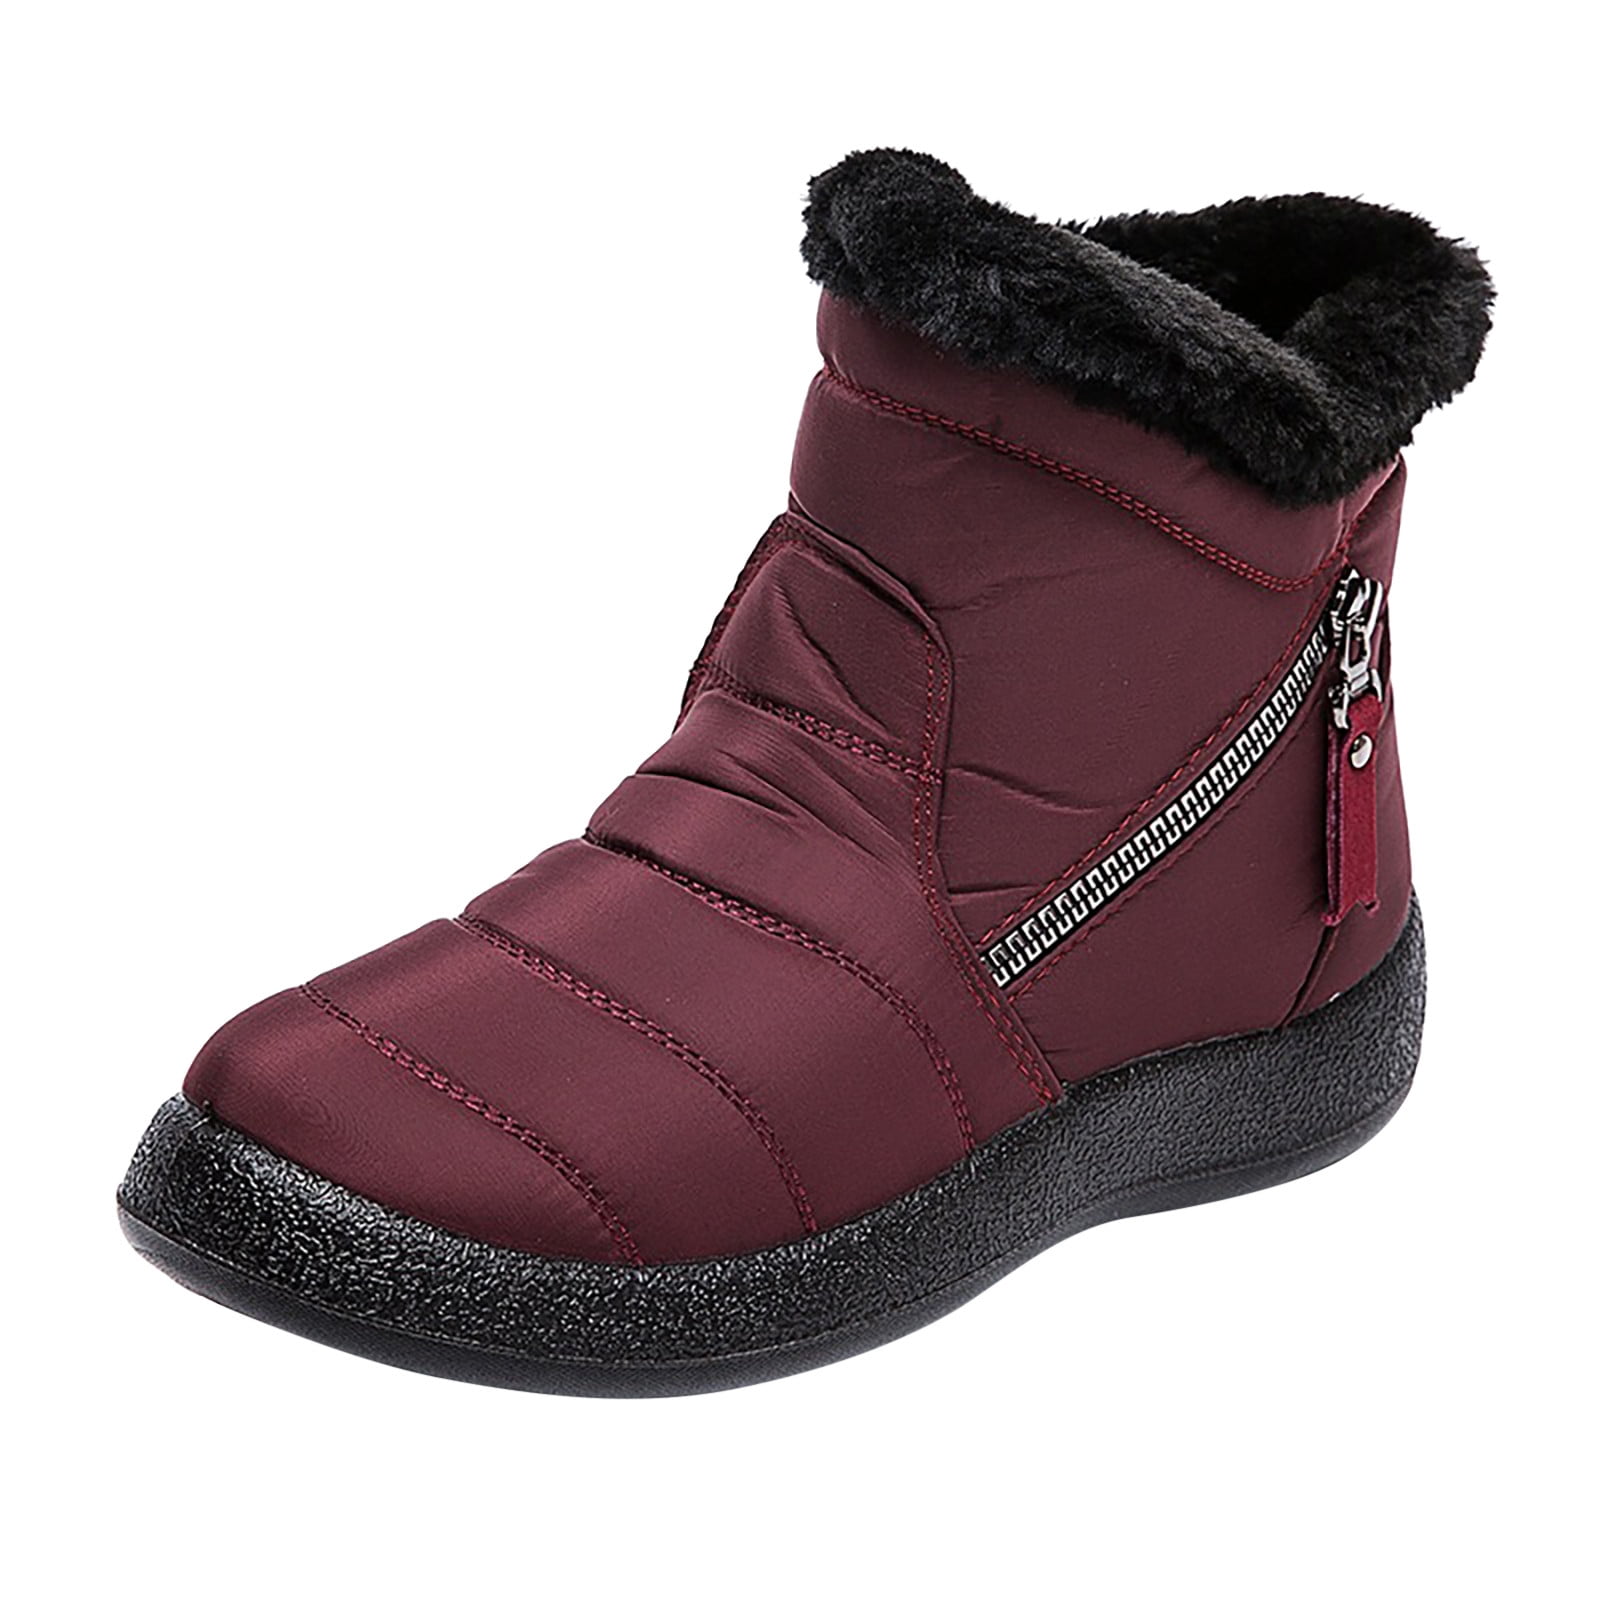 Snow Boots Flat Proof Warm LaceUp Boots Women Water Keep Velvet Round ...